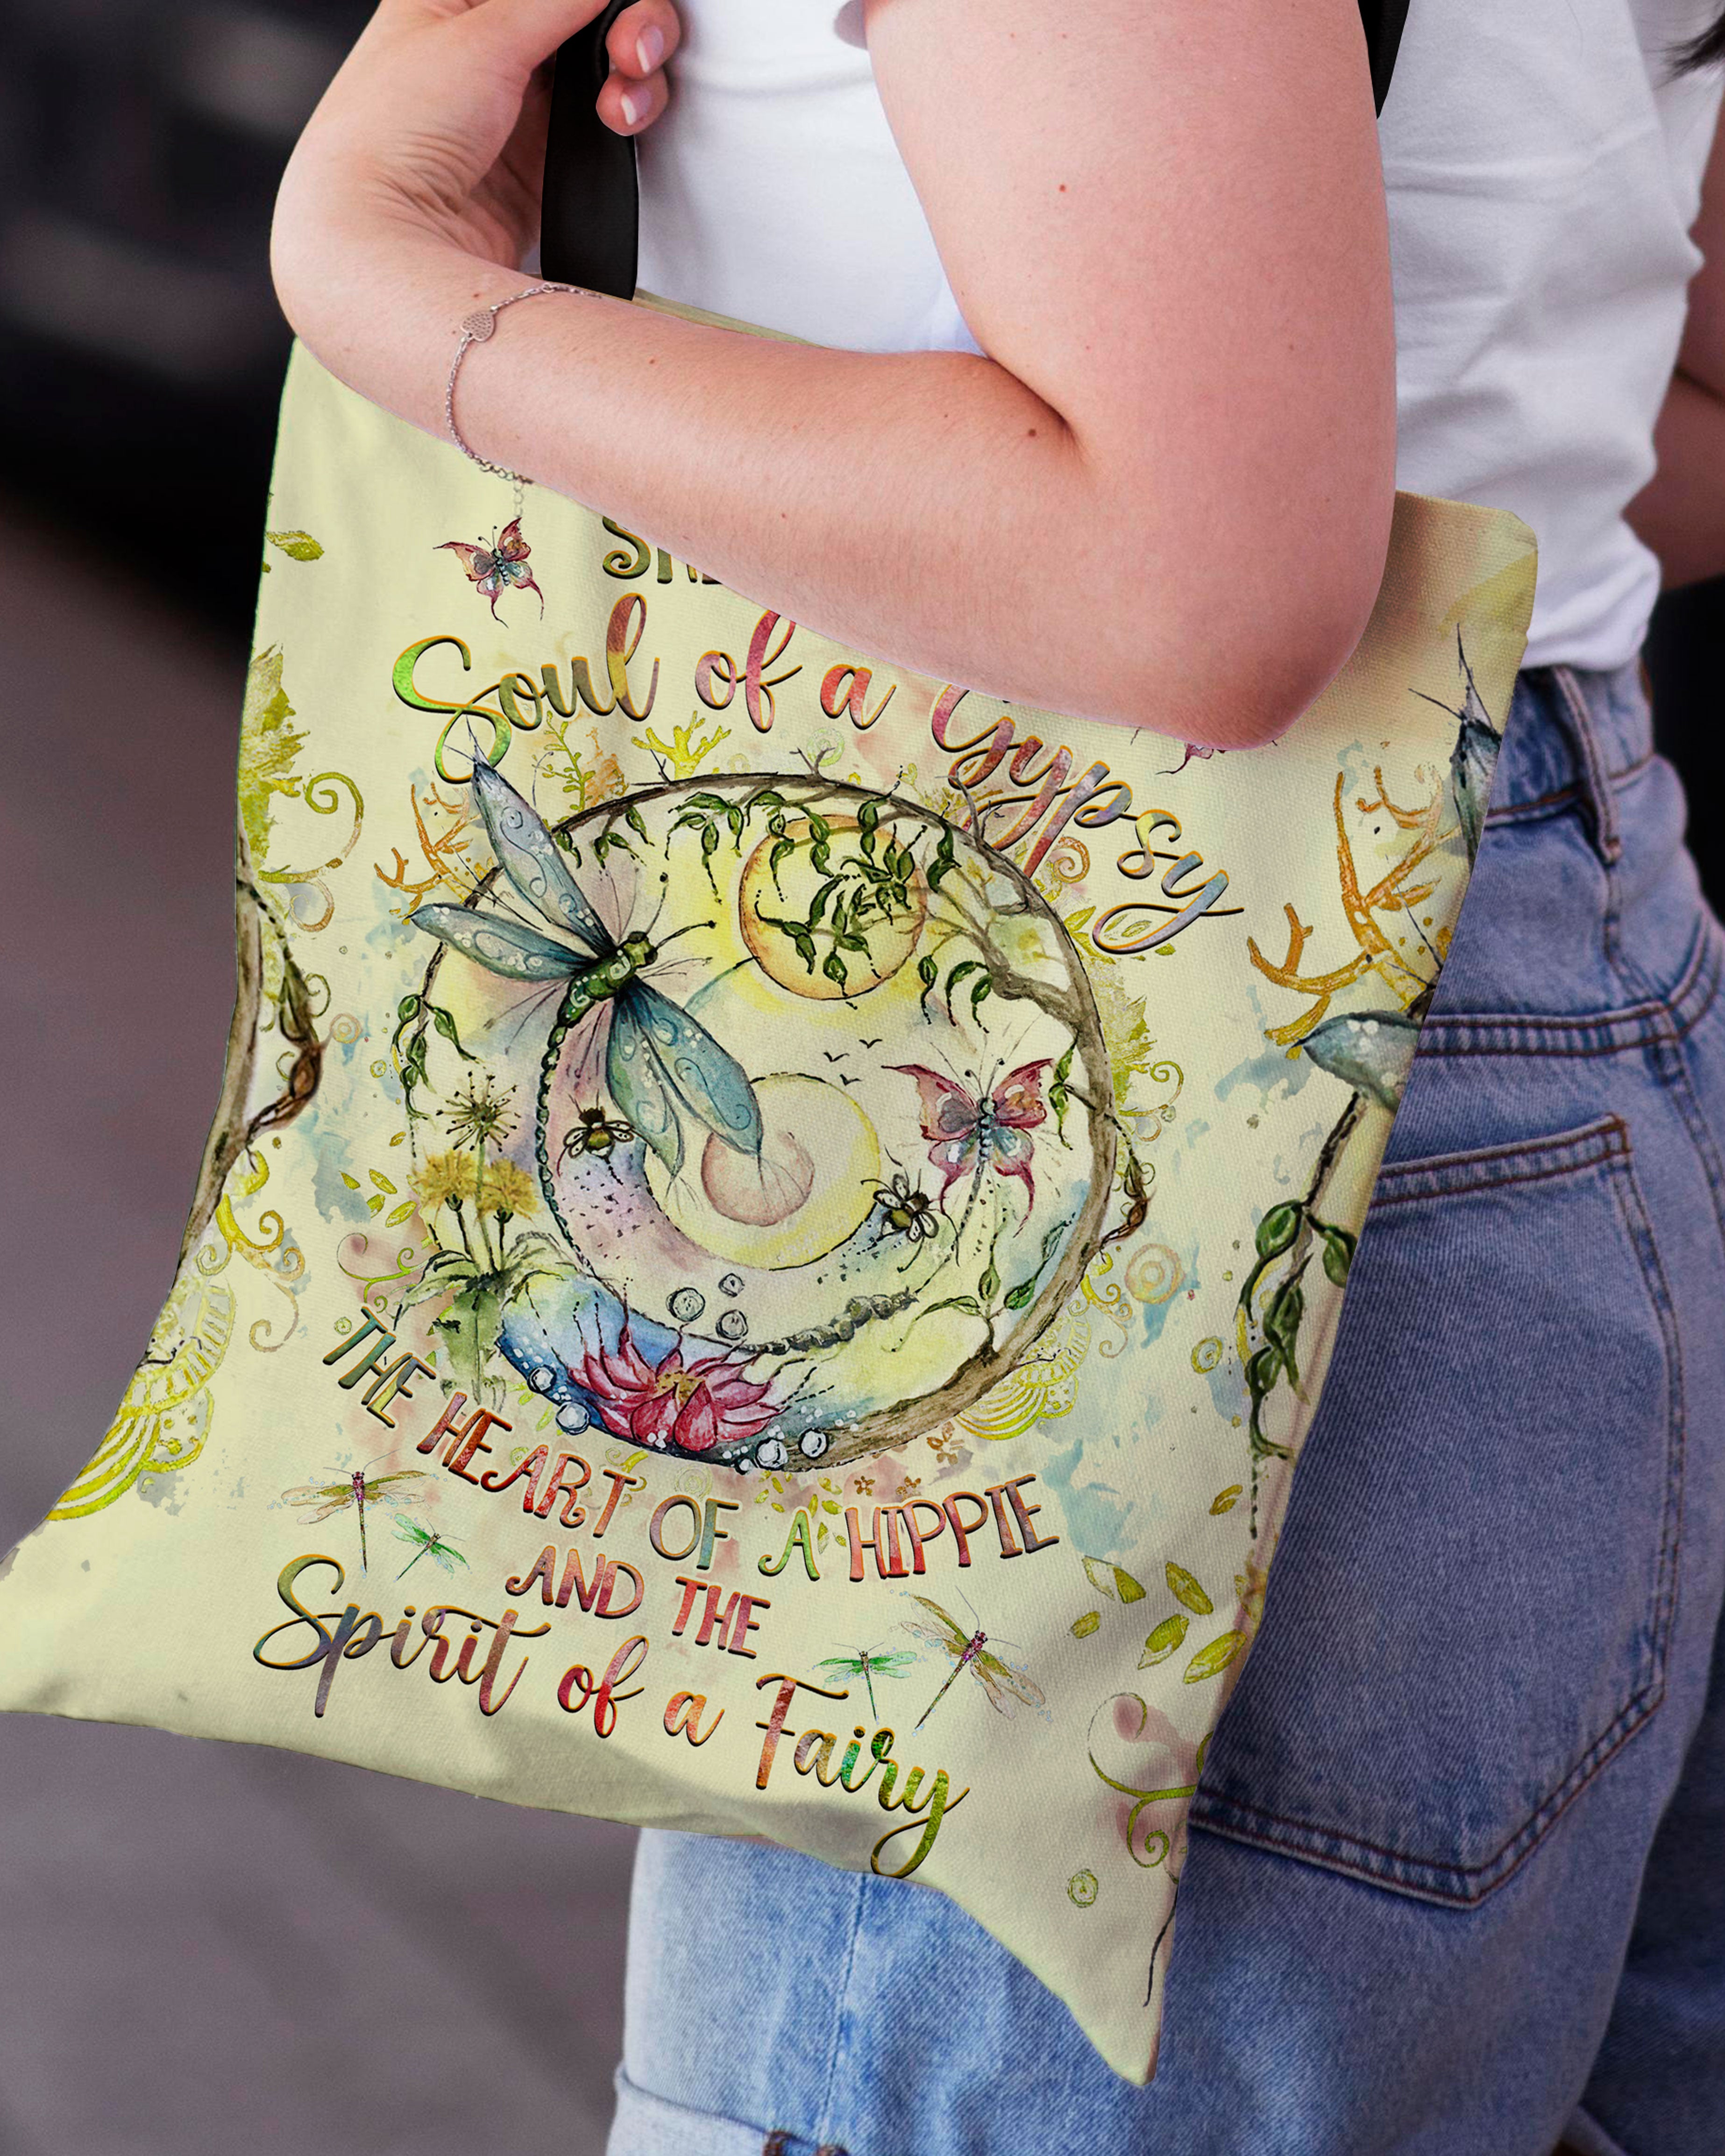 SPIRIT OF A FAIRY DRAGONFLY TOTE BAG - YHHG2308234